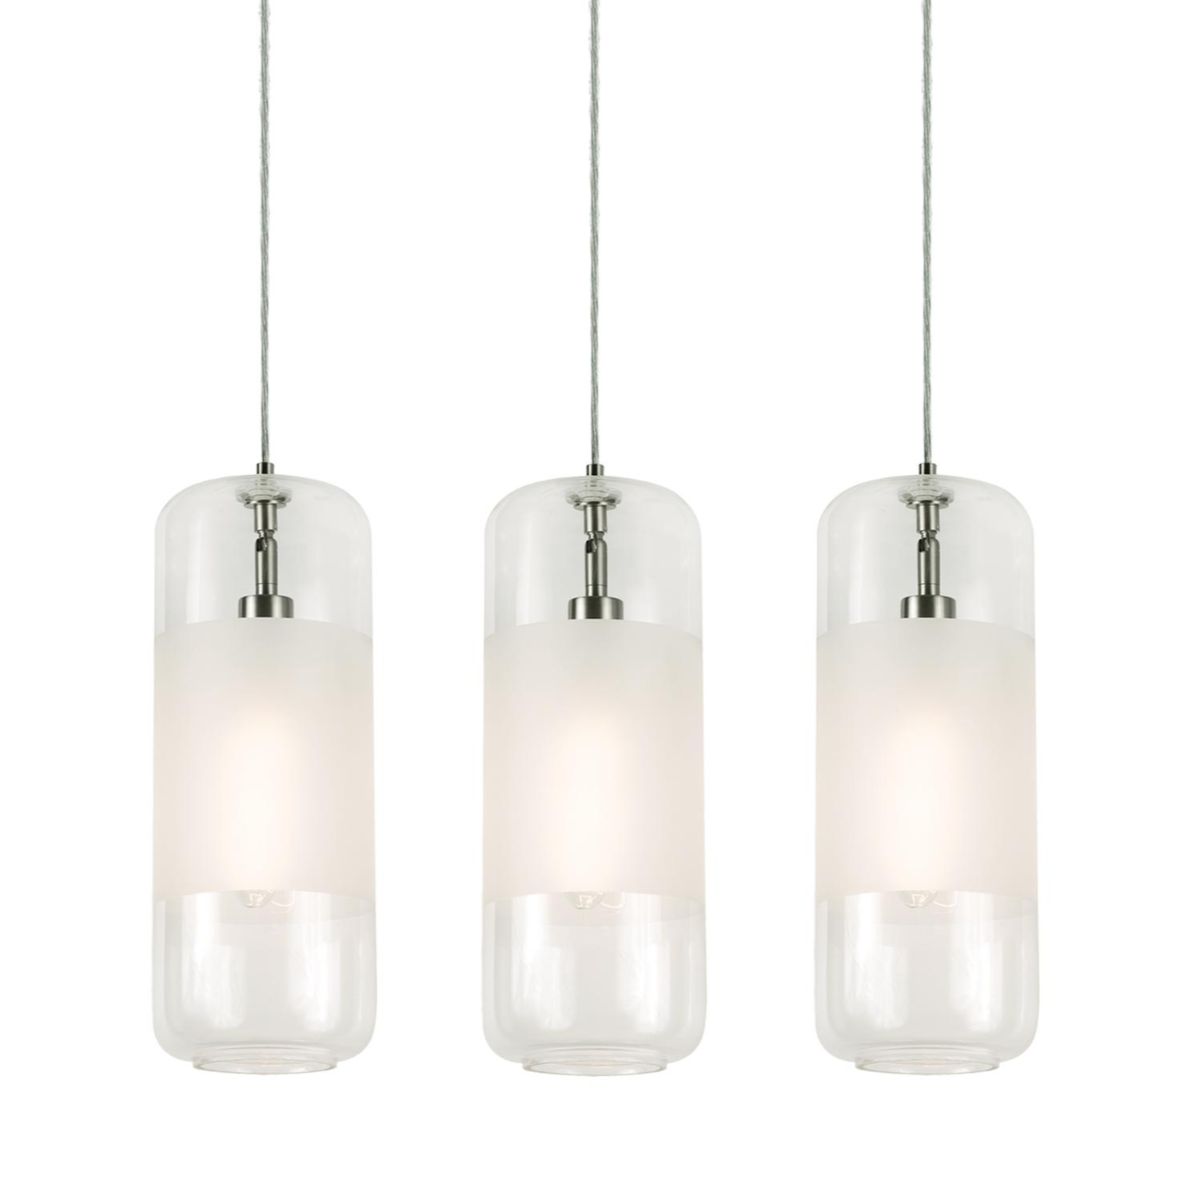 Hermosa 41 in. 3 lights Pendant Light Satin Nickel finish with Clear shade